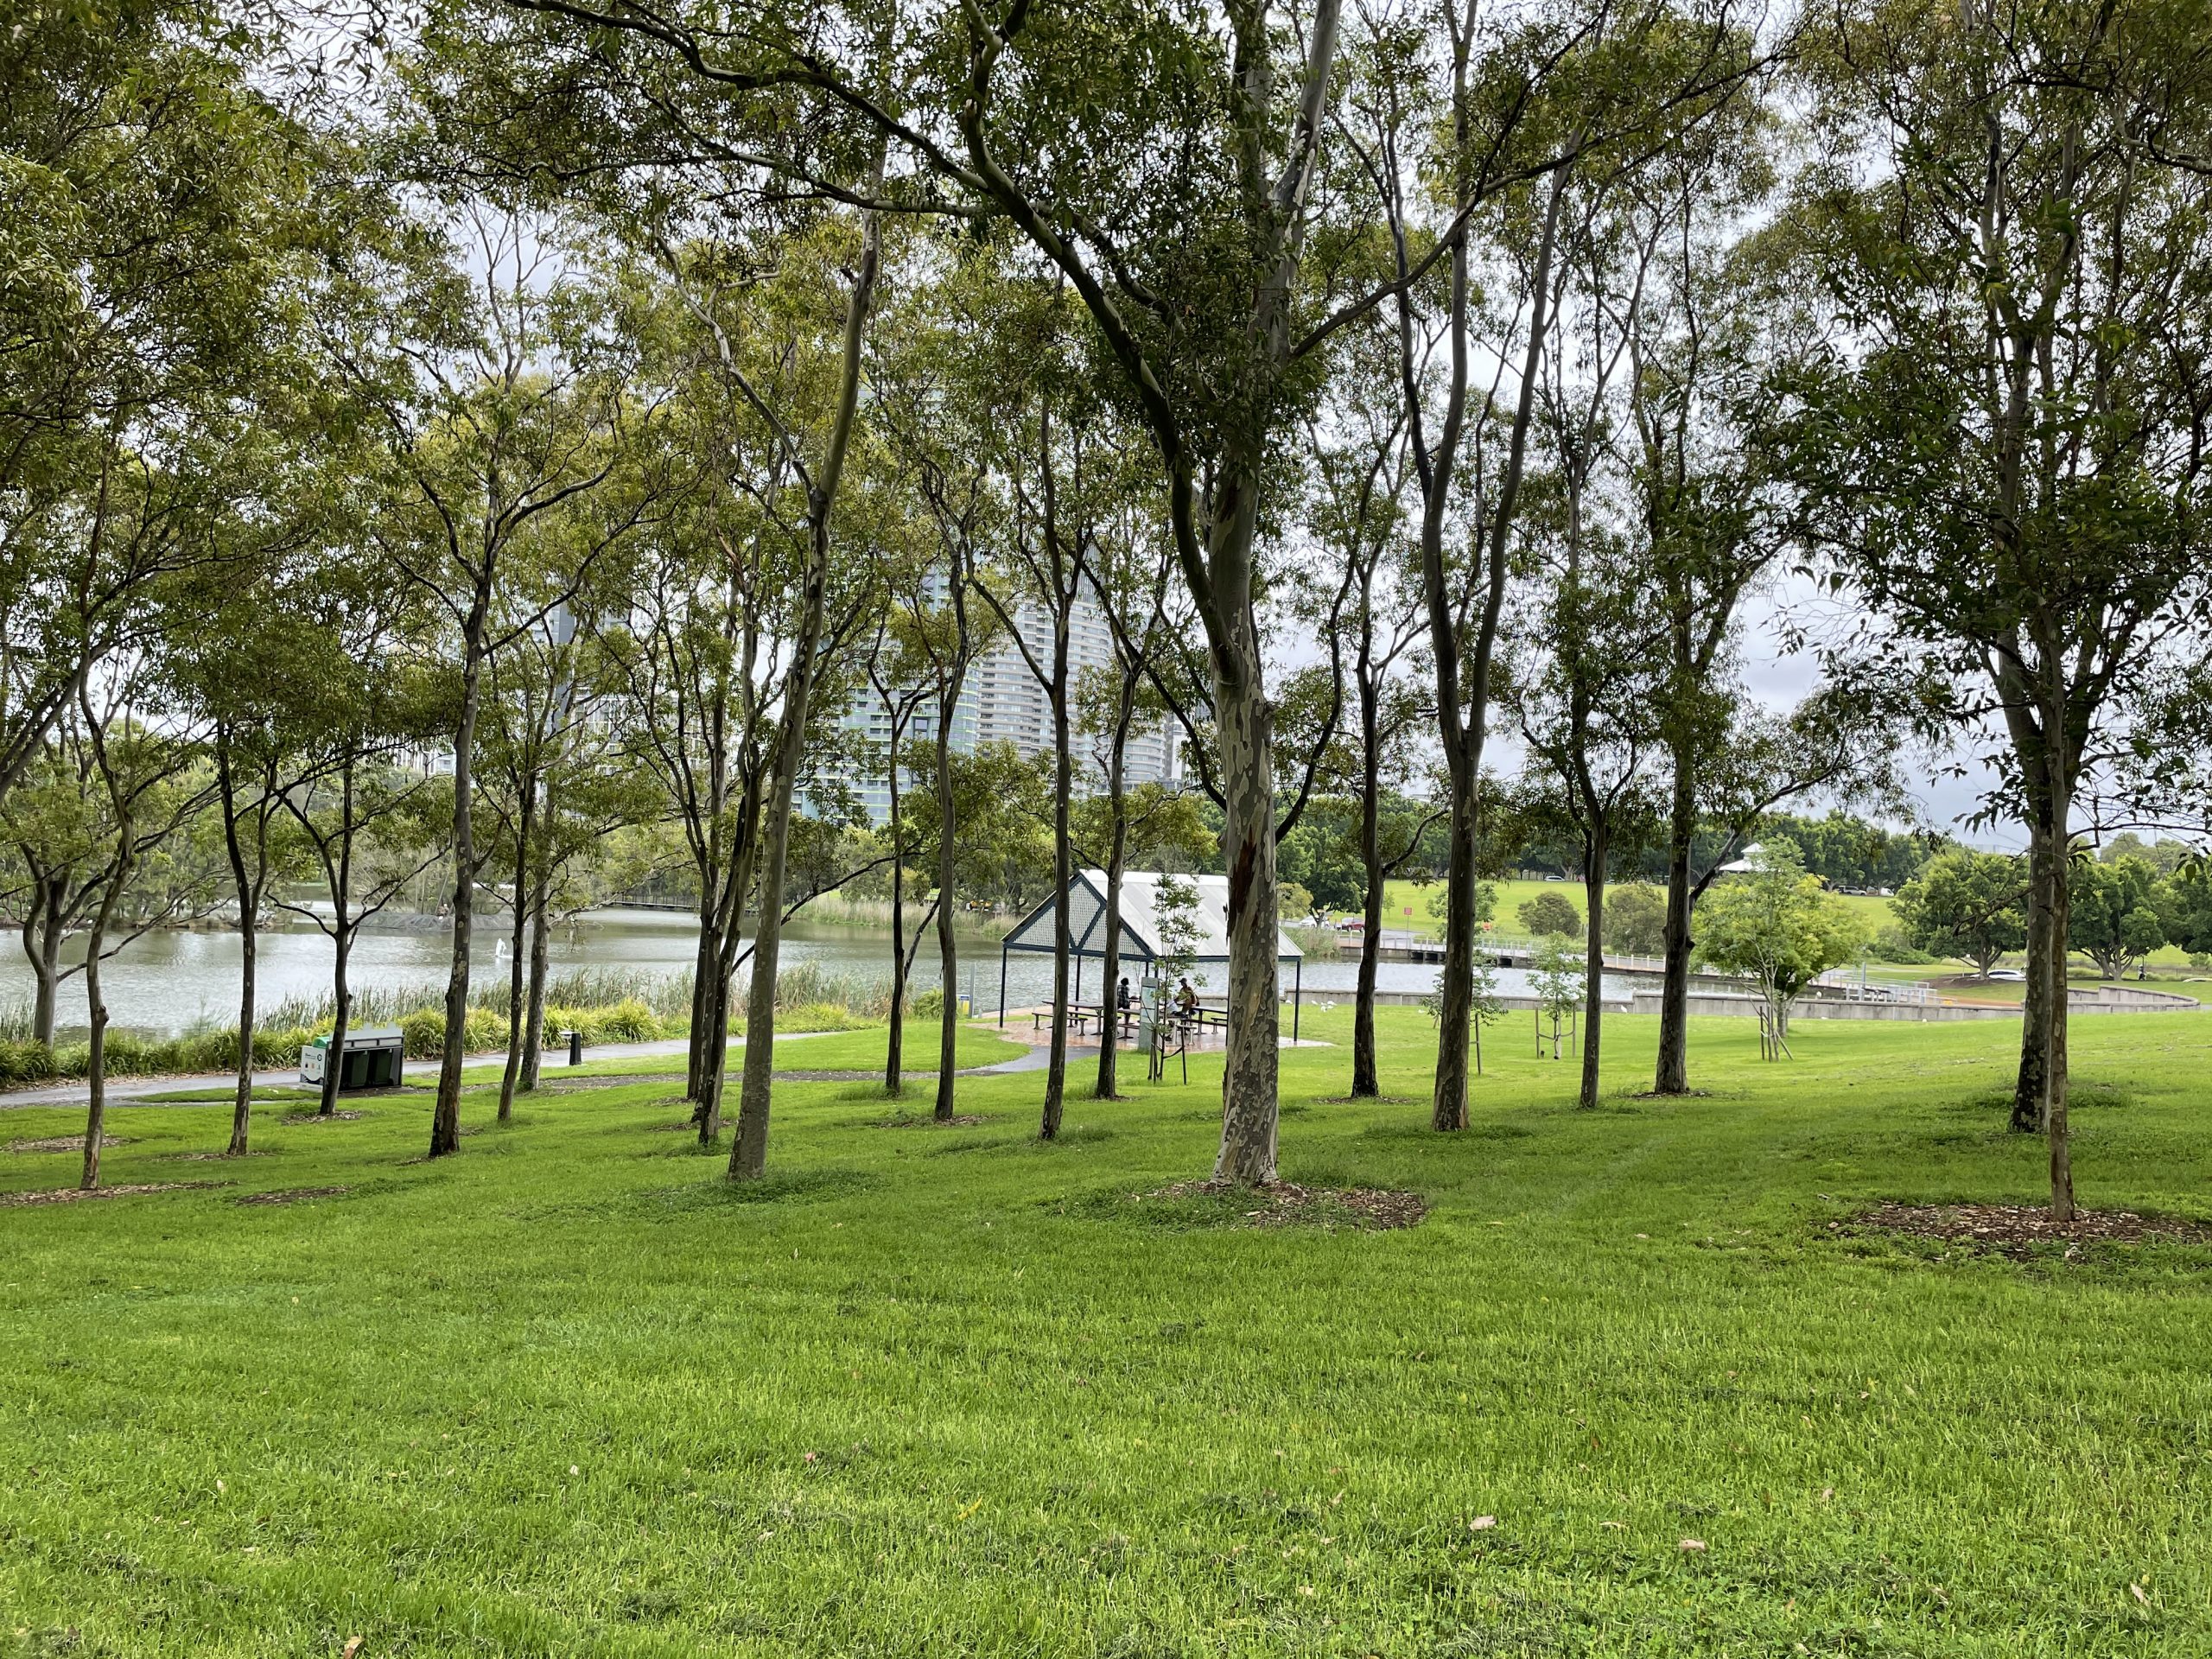 Western Sydney University researchers are leading an expert team that will transform Bicentennial Park at Sydney Olympic Park into the coolest public park in the state.